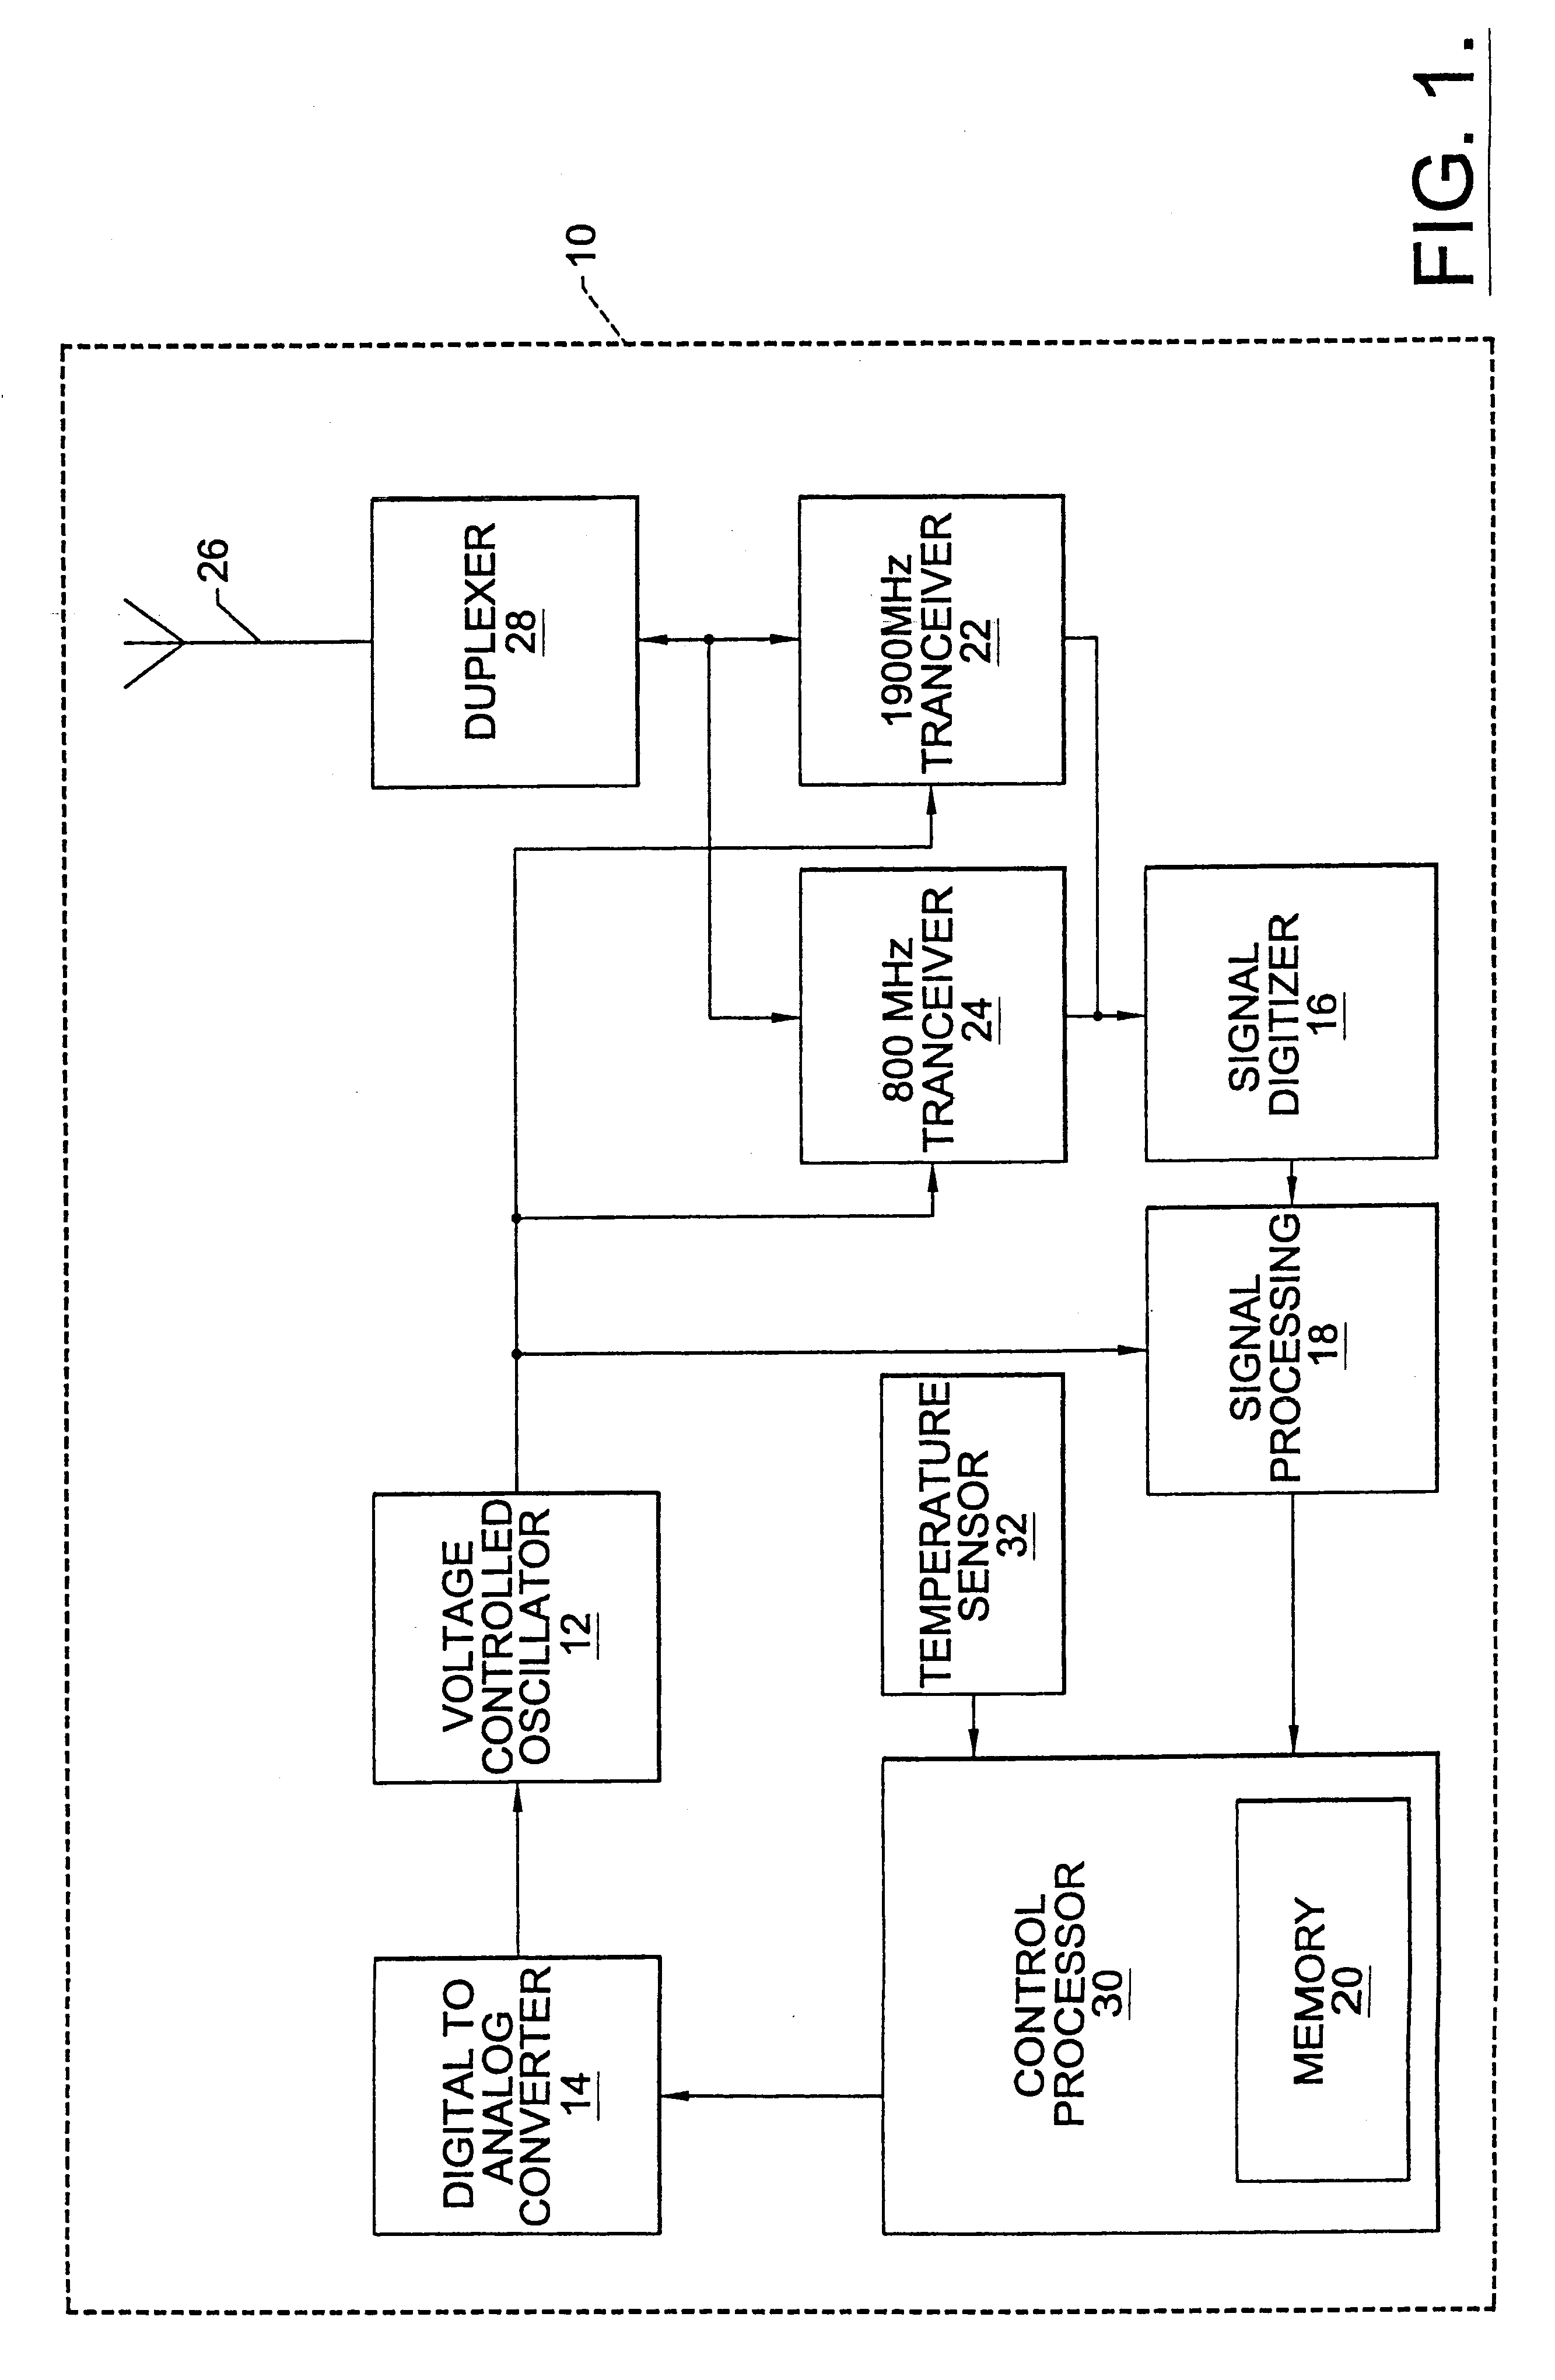 Methods and systems for frequency generation for wireless devices